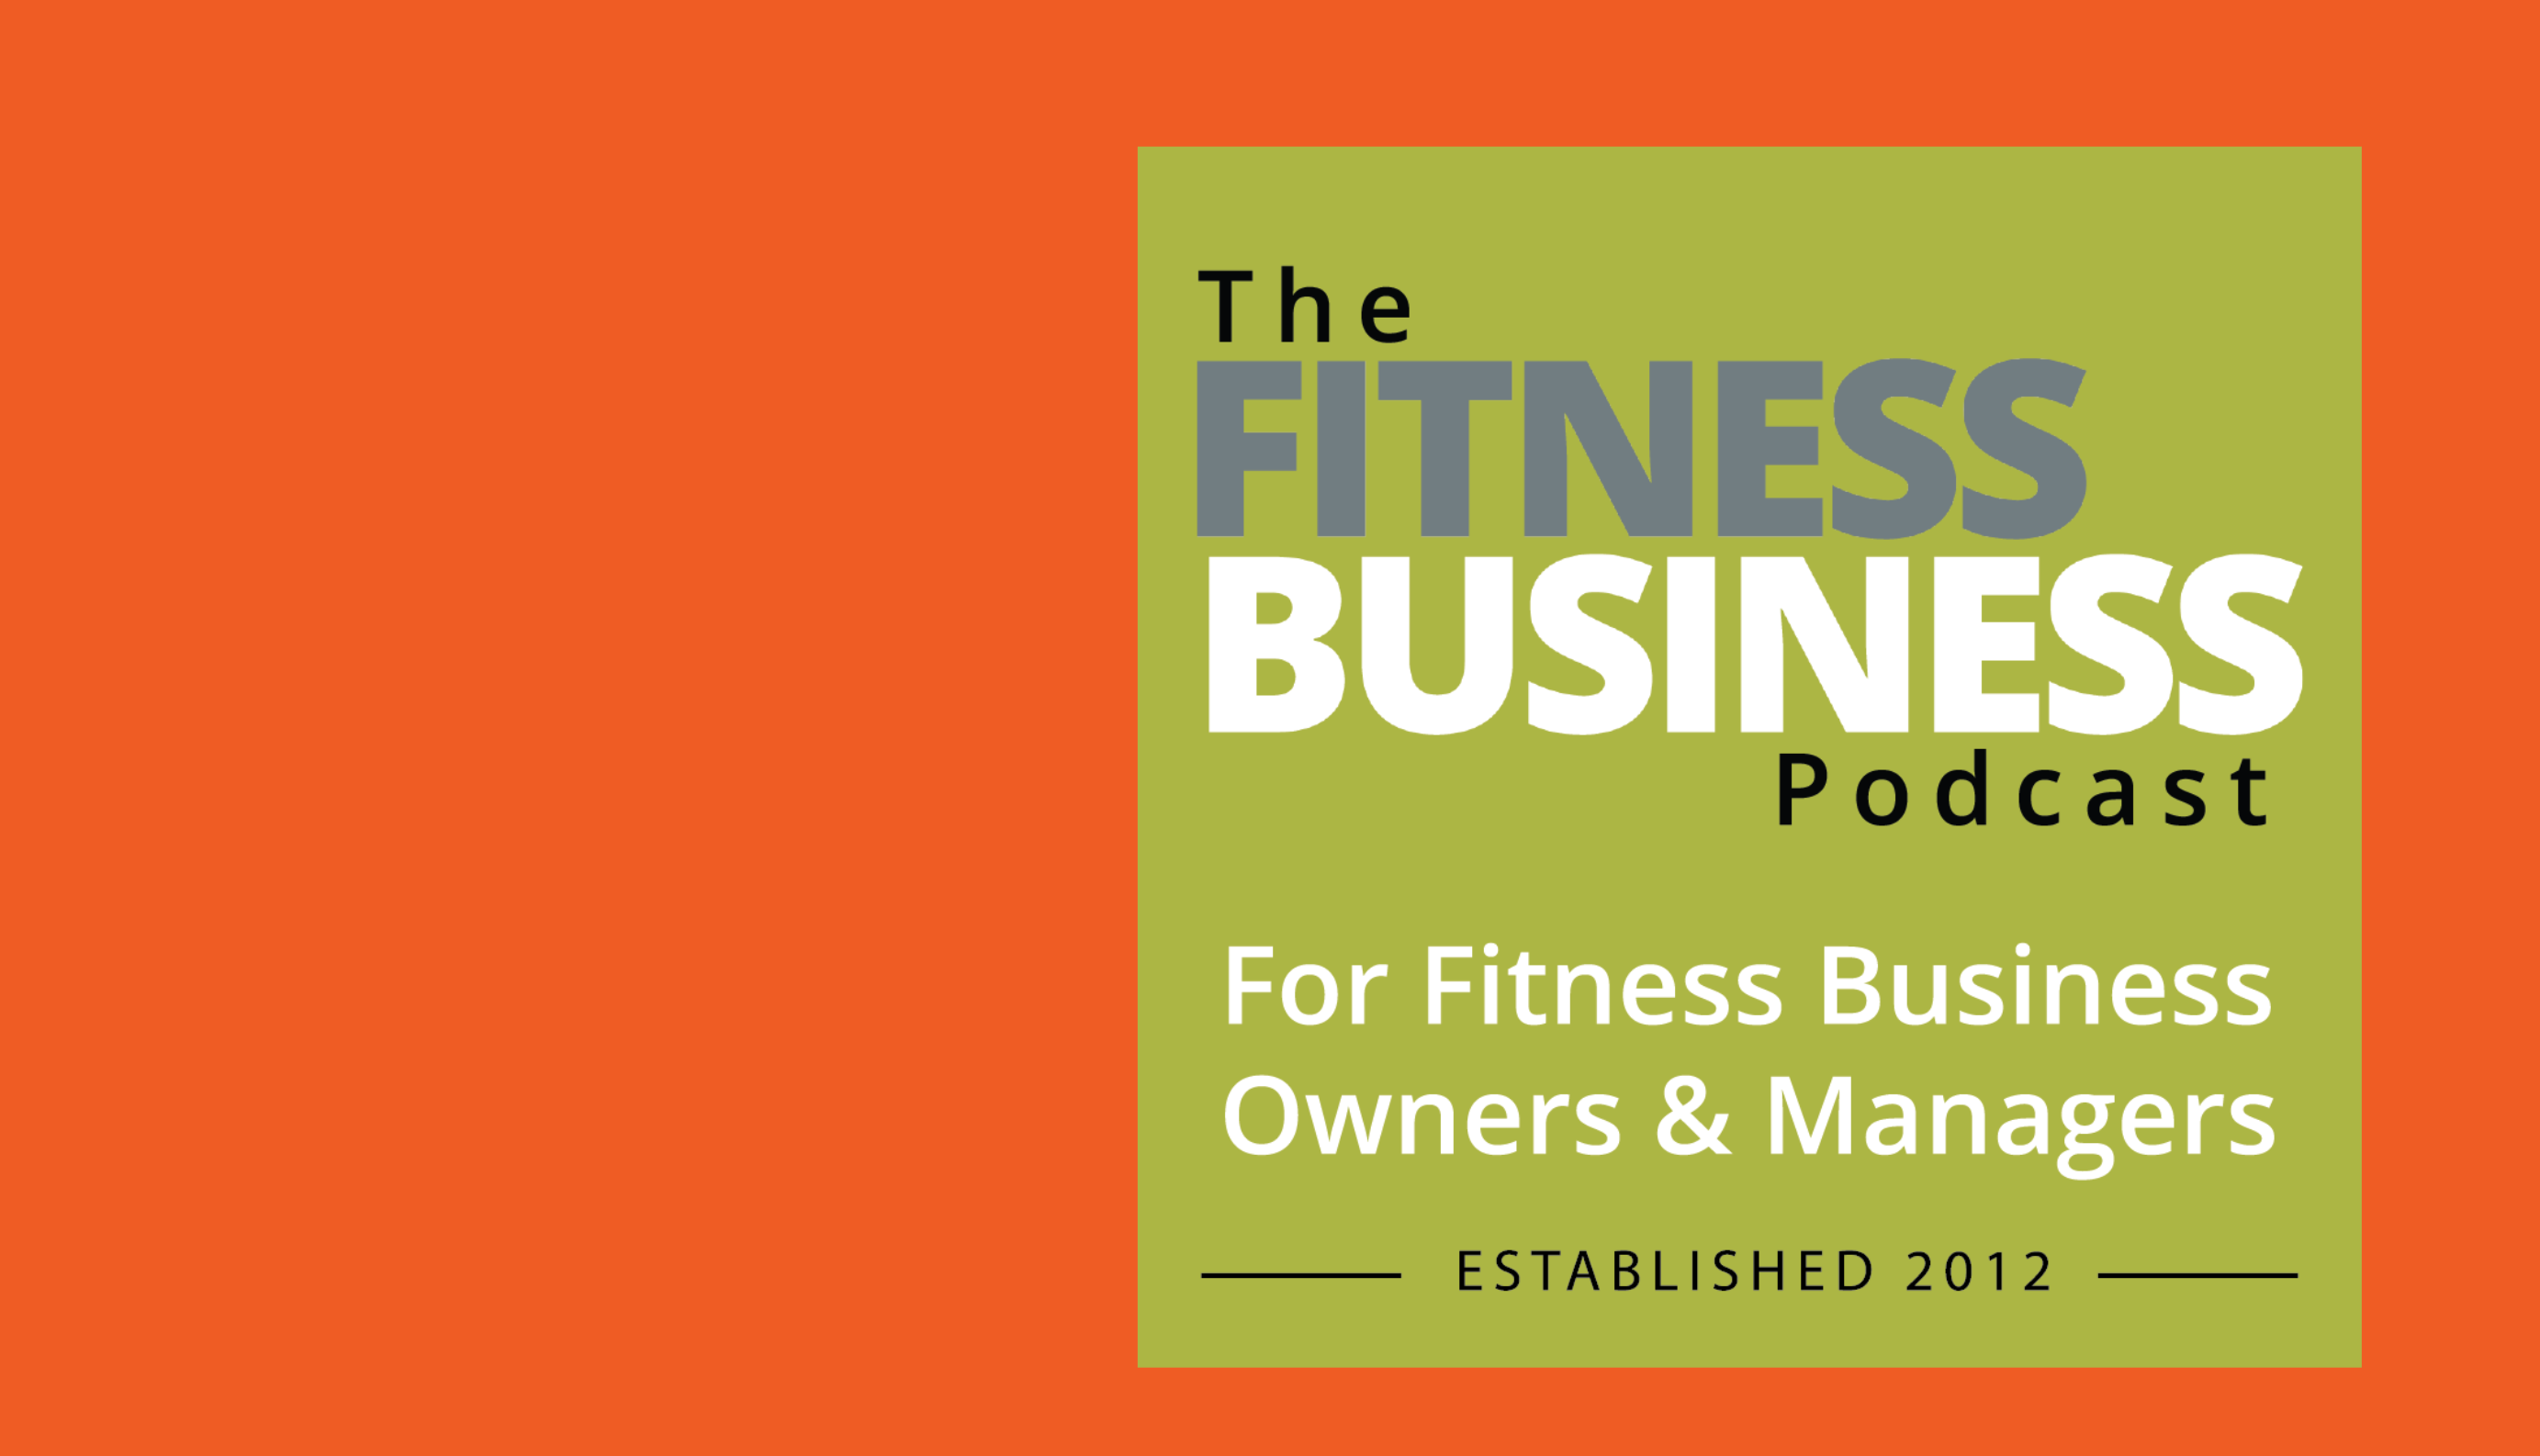 'The Fitness Business Podcast' hits 700,000 downloads